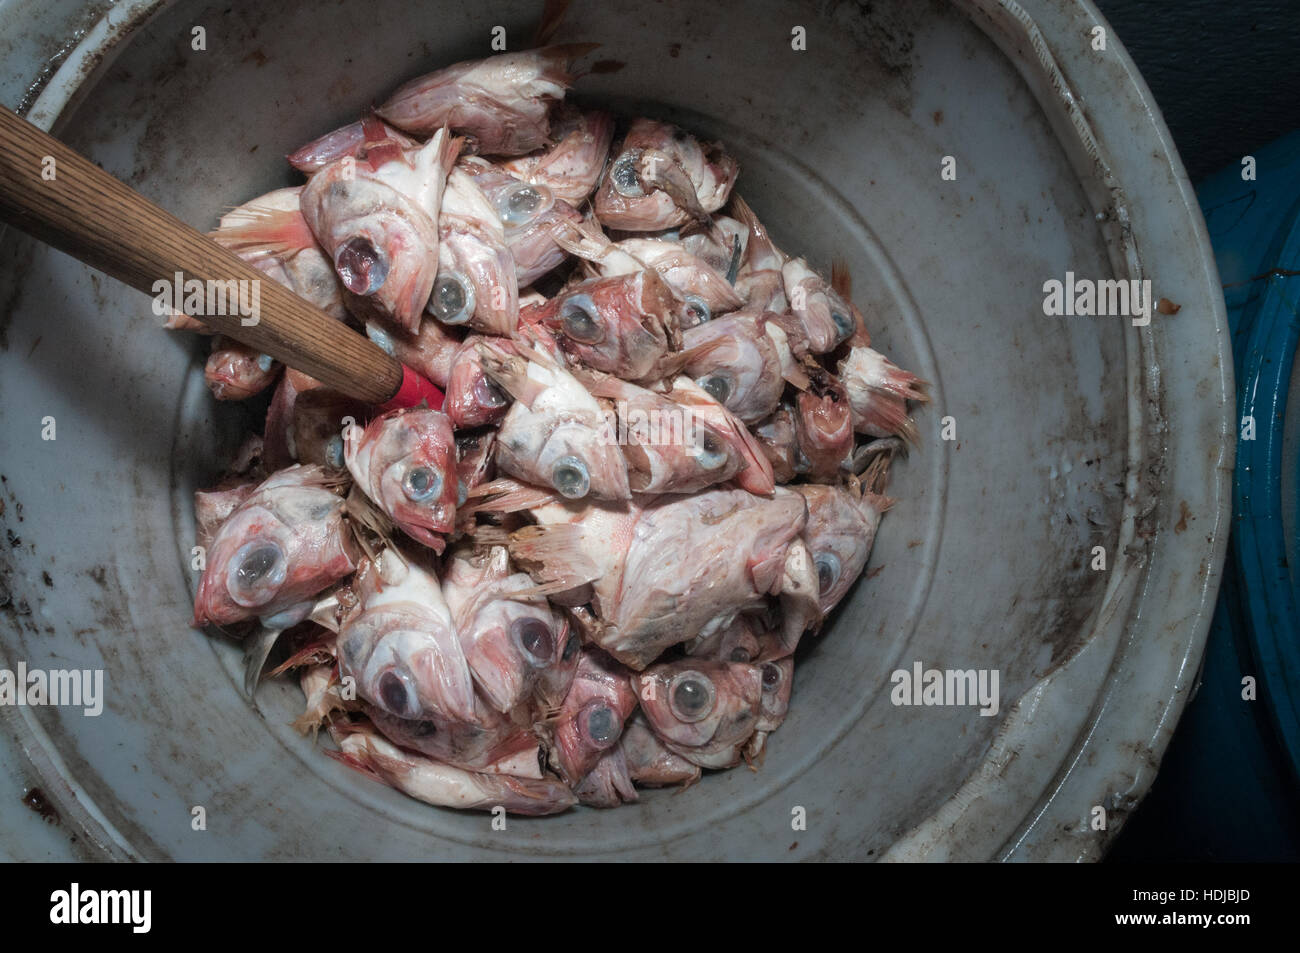 Lobster Bait Stock Photos & Lobster Bait Stock Images - Alamy